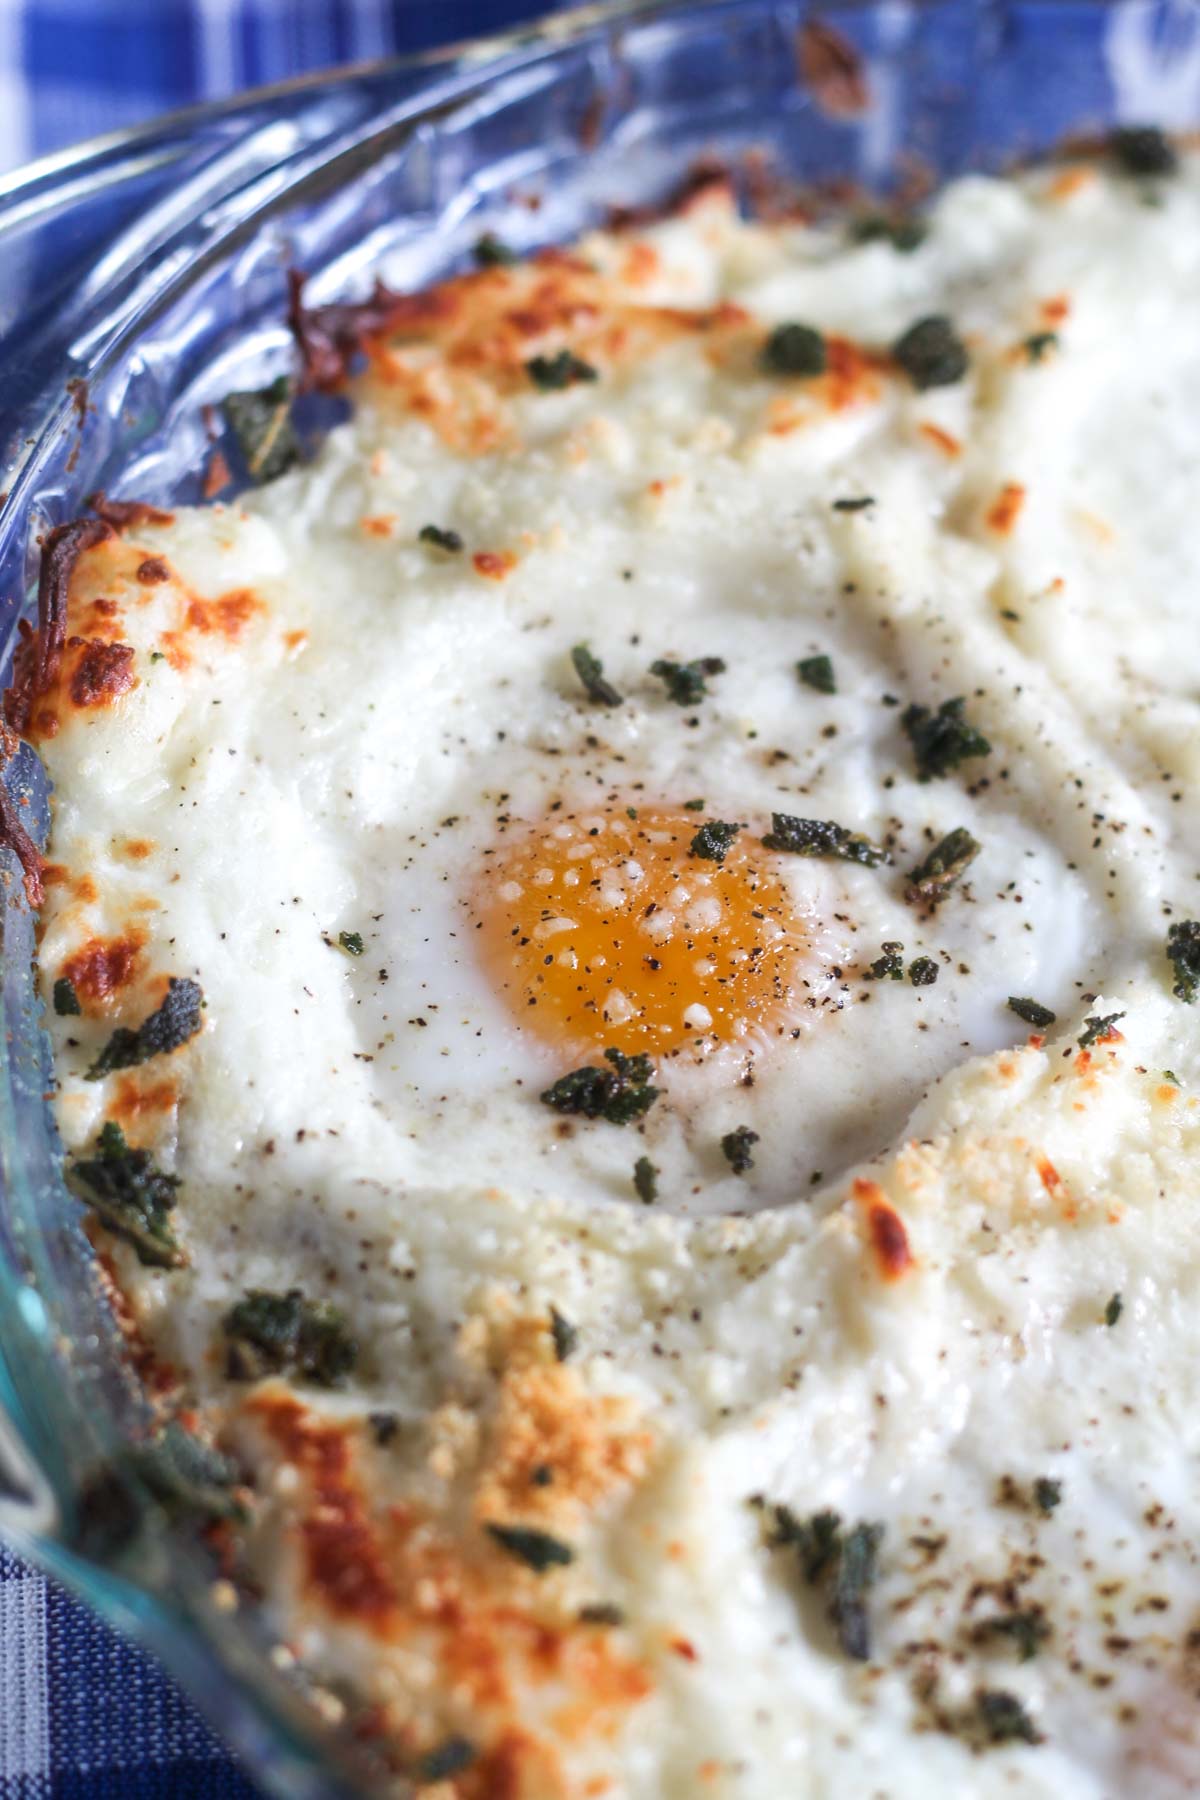 Wondering what to make with leftover mashed potatoes? These eggs baked in mashed potatoes are a perfect breakfast!